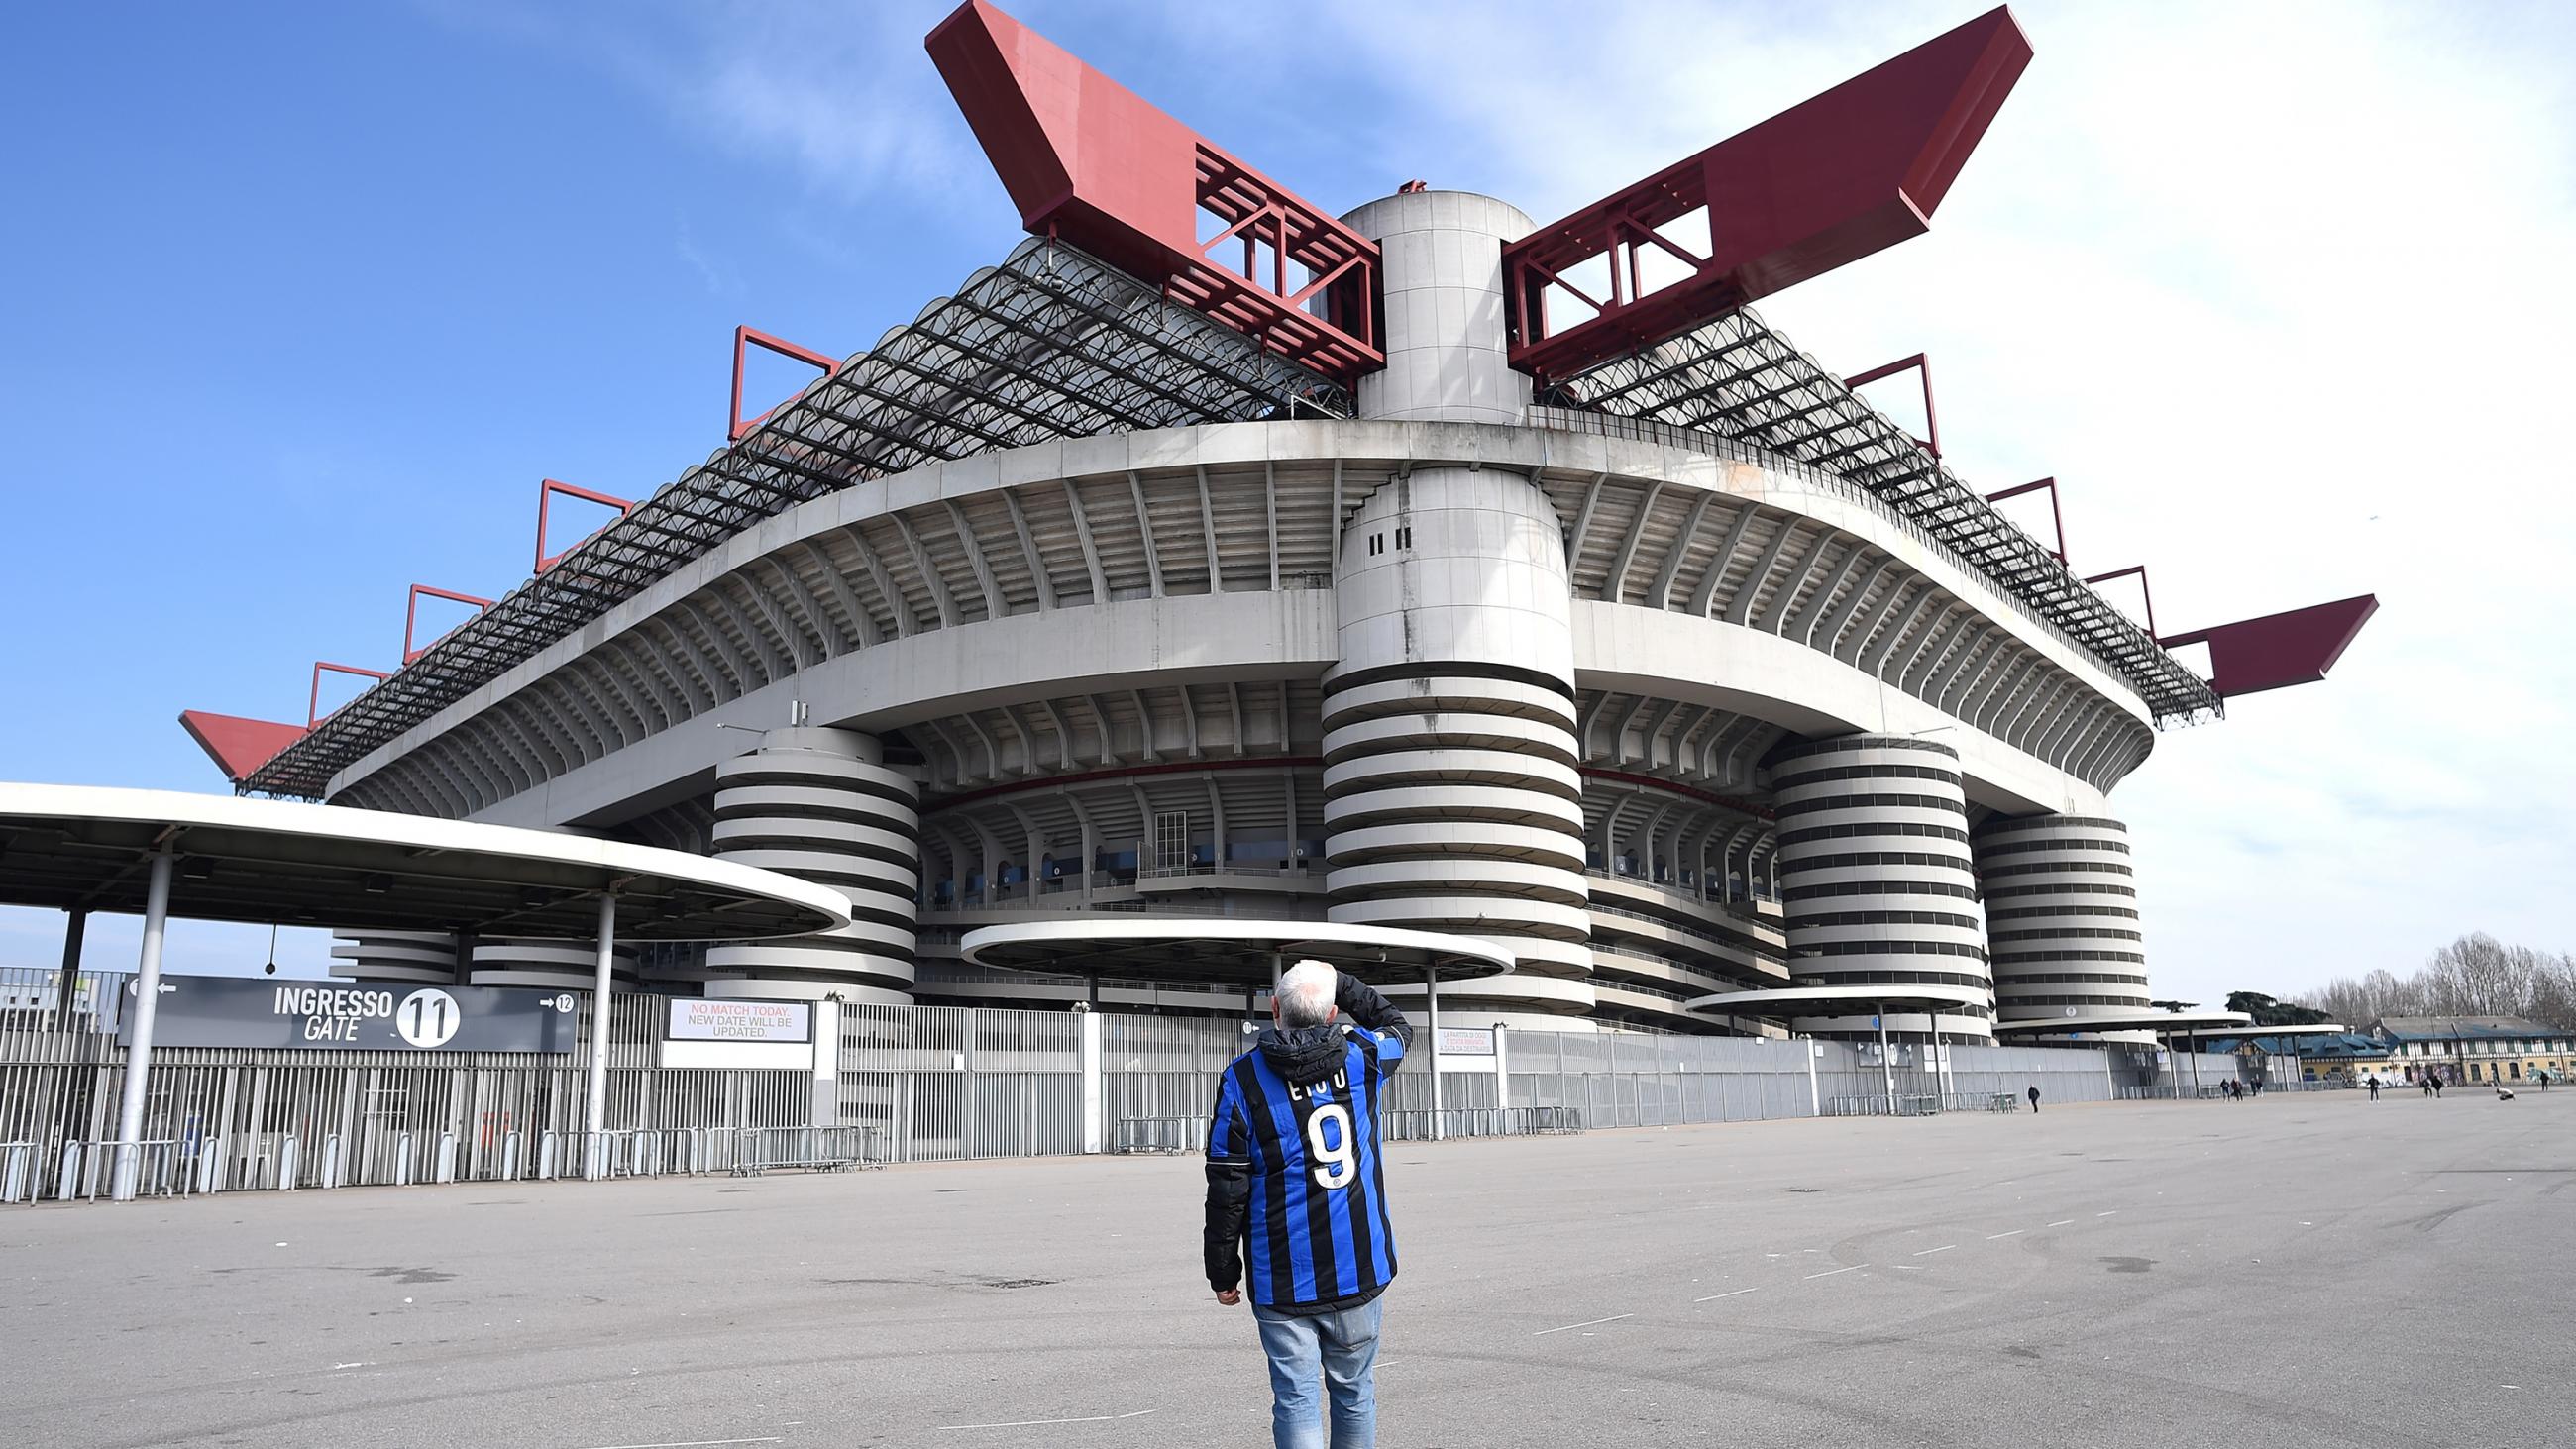 The picture shows a man wearing a fan jersey in an empty lot in front of a massive stadium. 